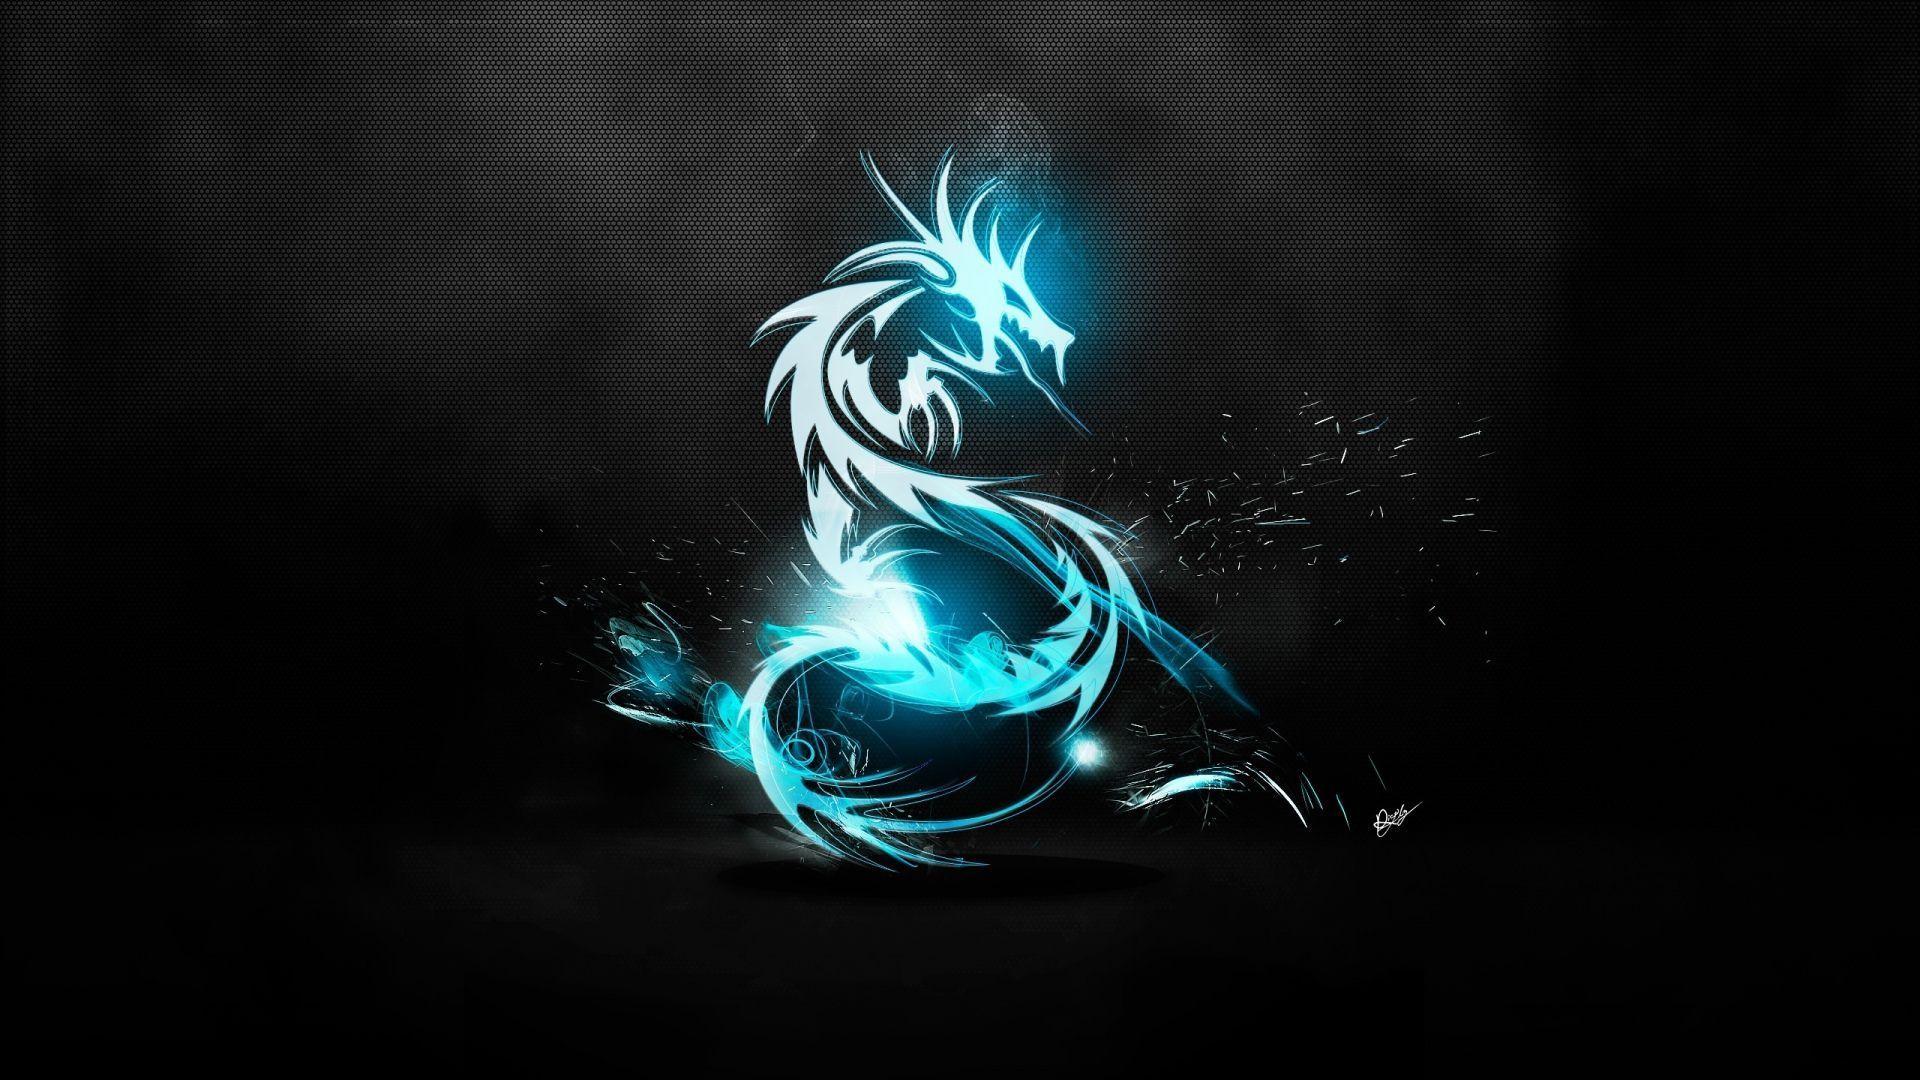 1080p Dragon Wallpapers Top Free 1080p Dragon Backgrounds